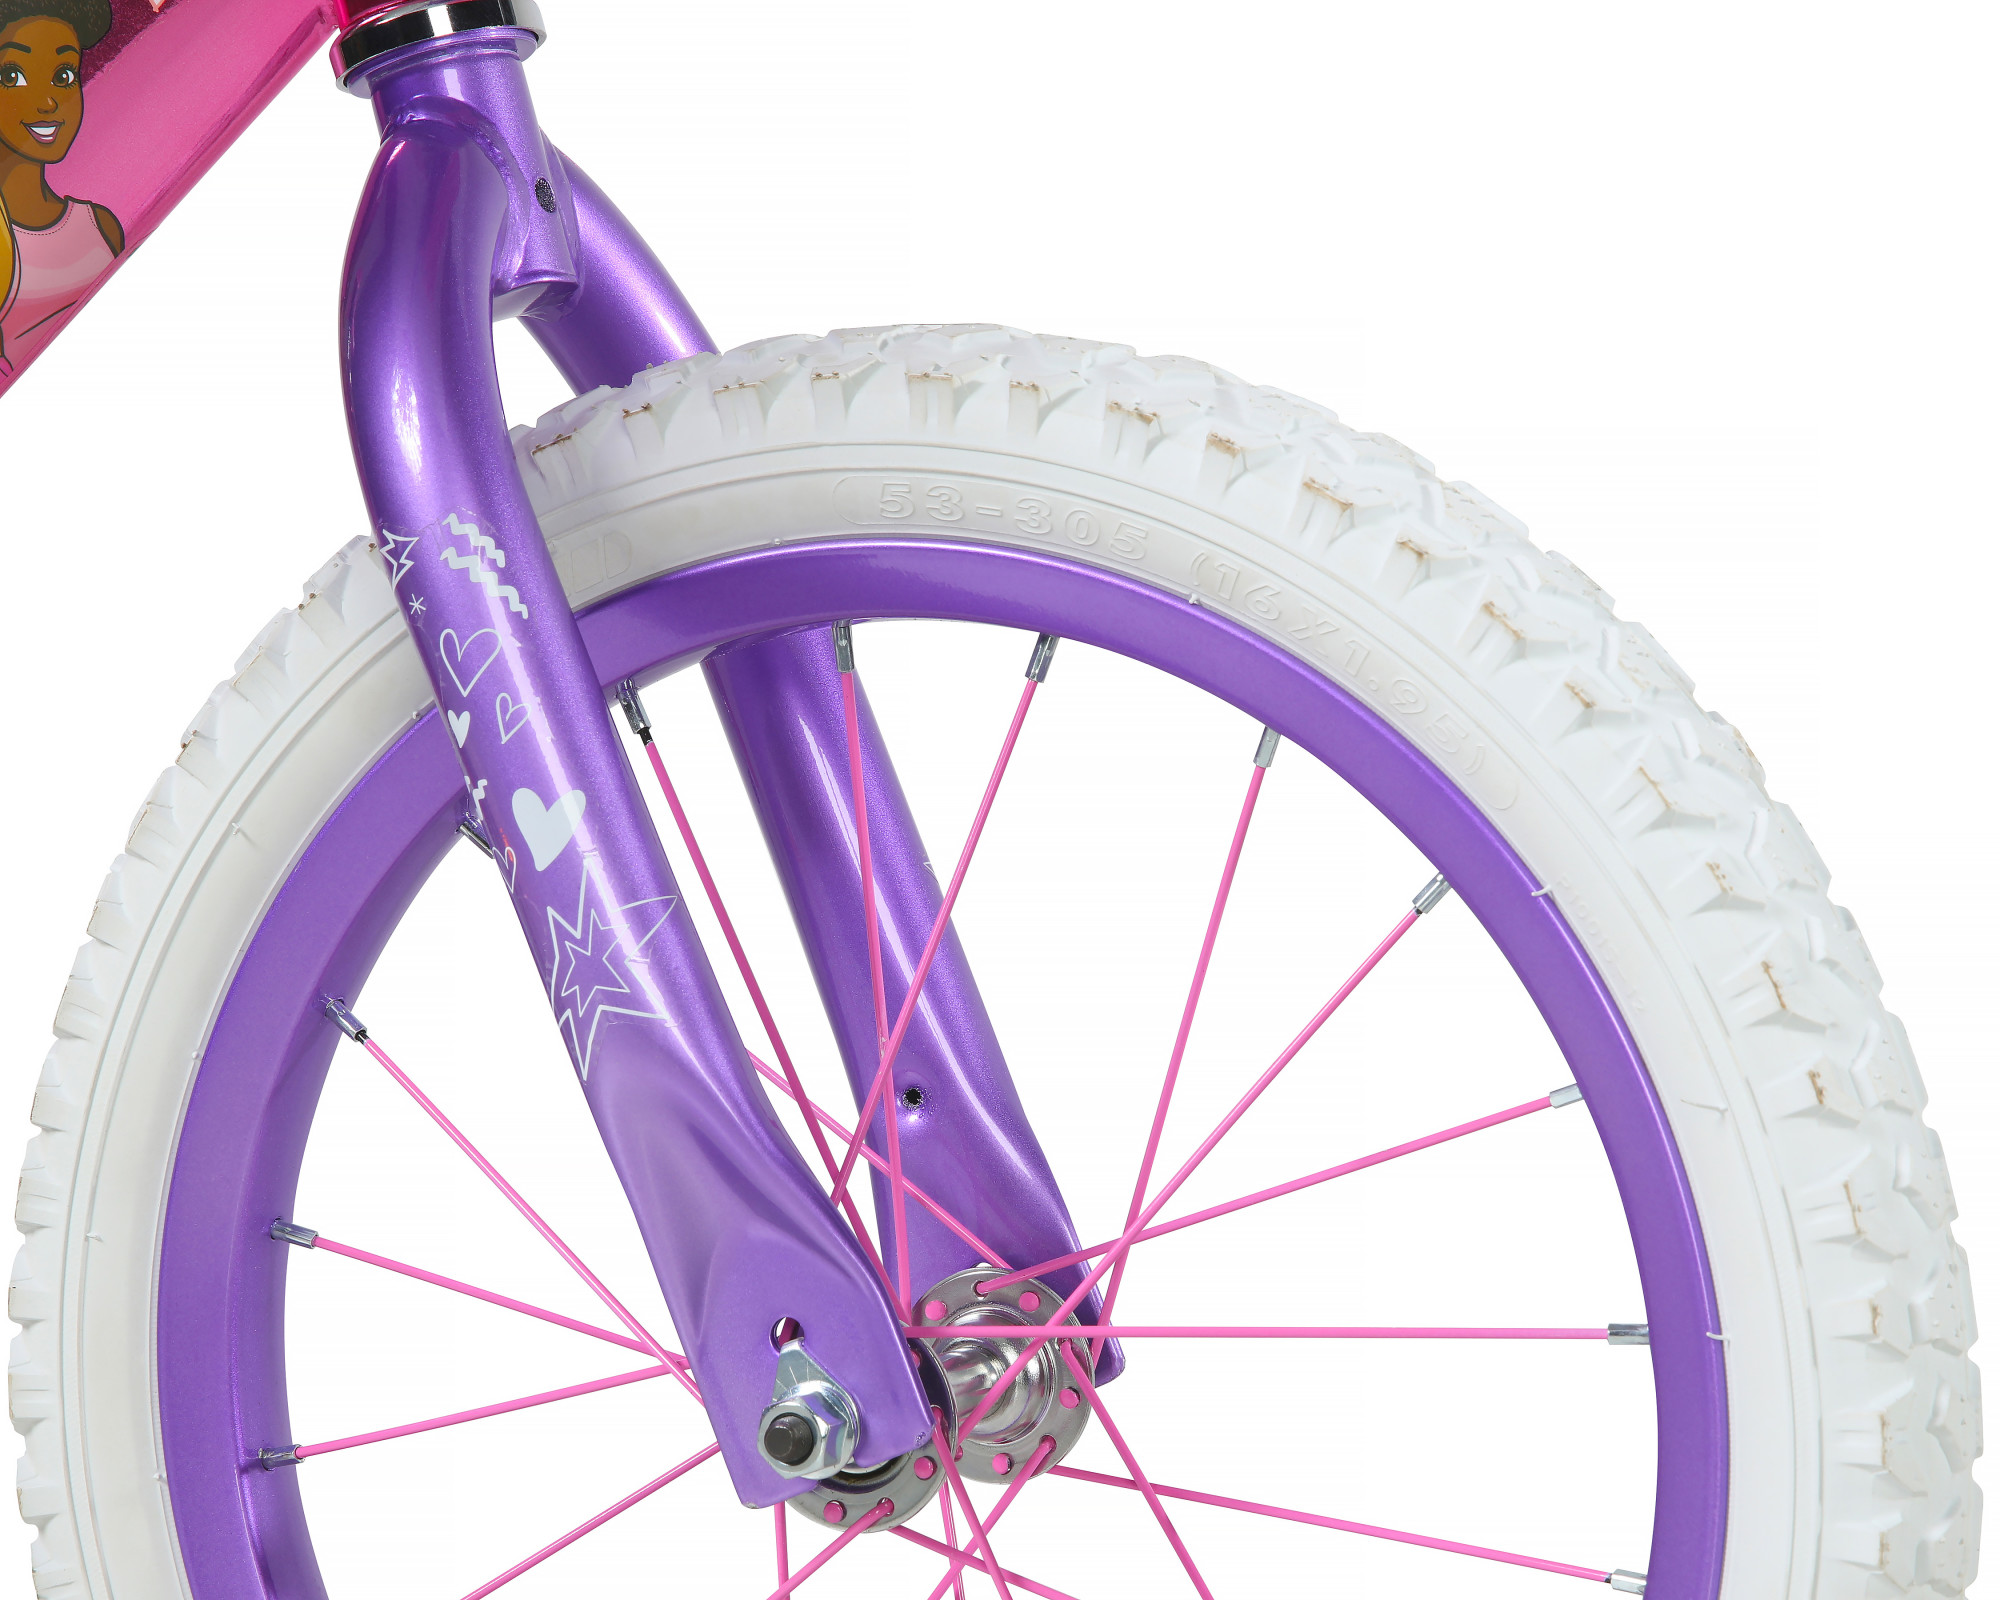 Dynacraft Barbie 16-inch Girls BMX Bike for Age 5-7 Years, Pink - image 5 of 8